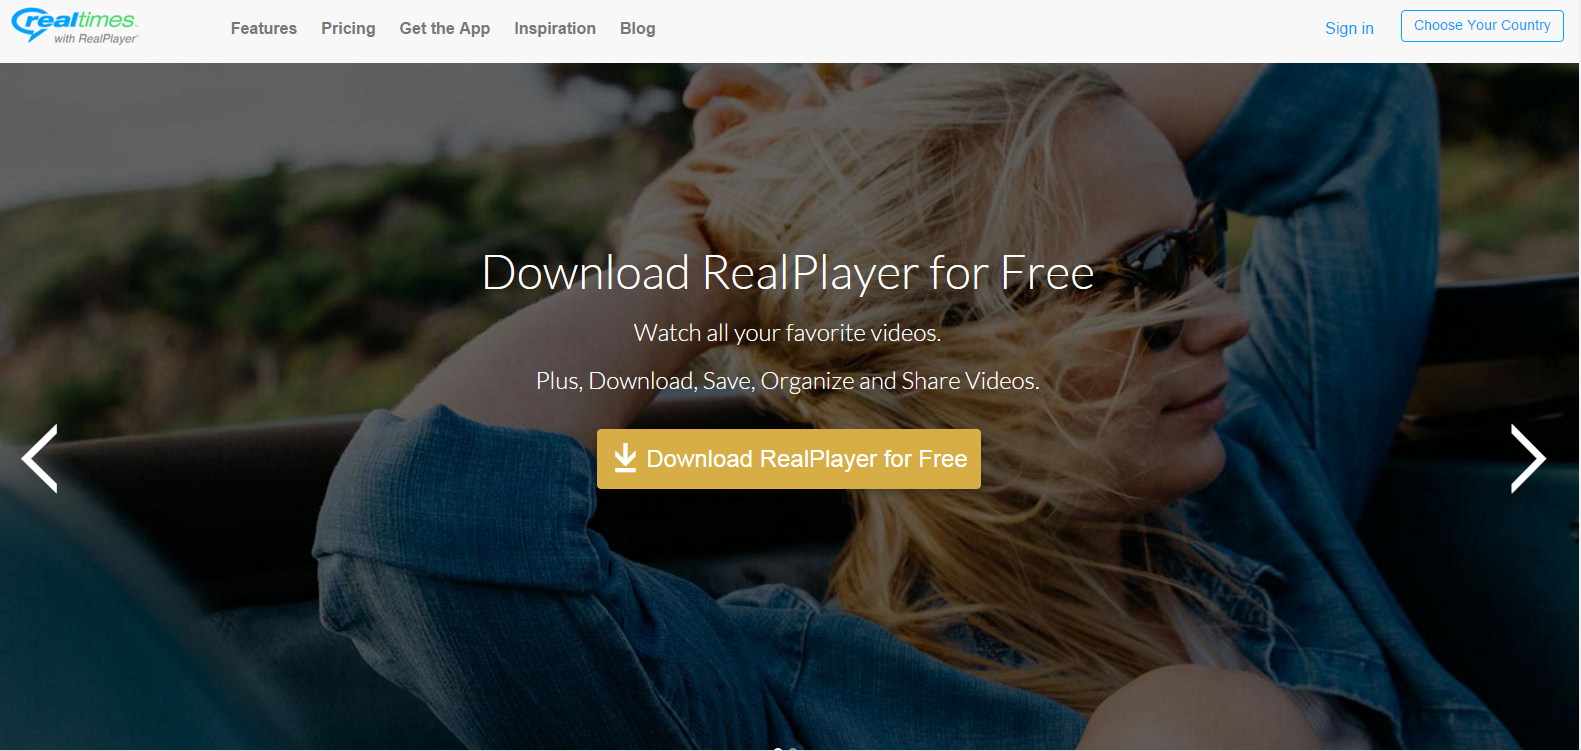 Realplayer download free   realtimes with realplayer 